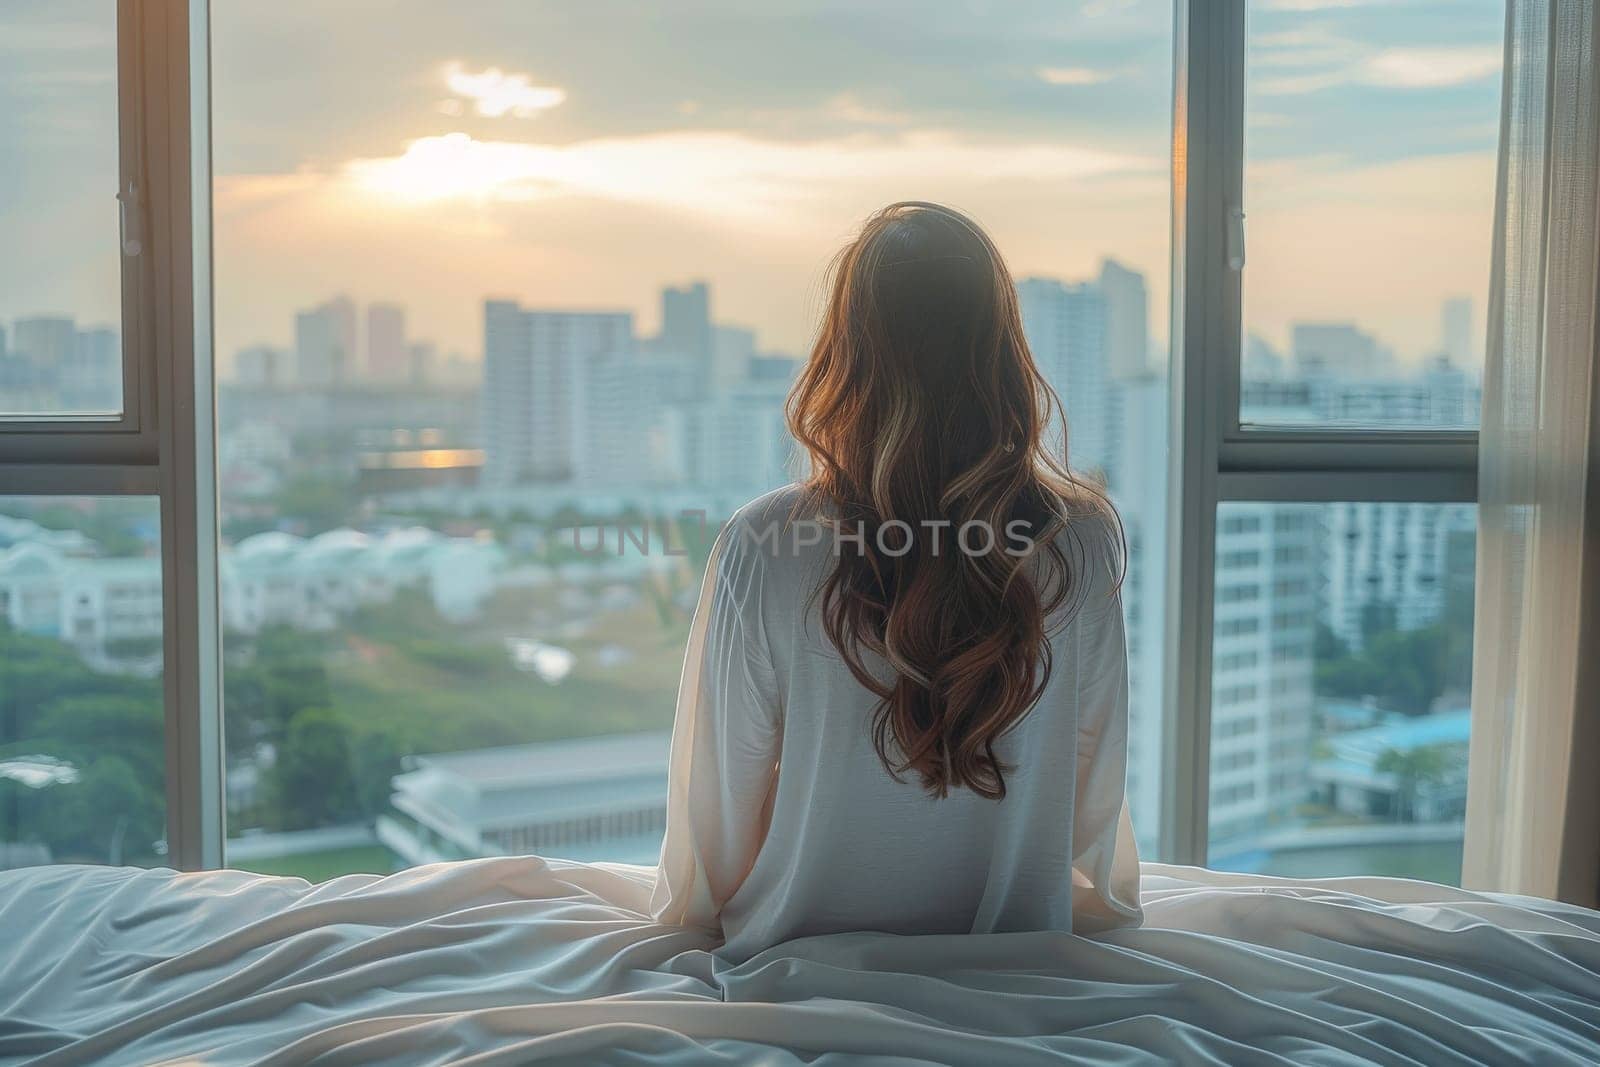 A woman is sitting on a bed whit beautiful view by itchaznong